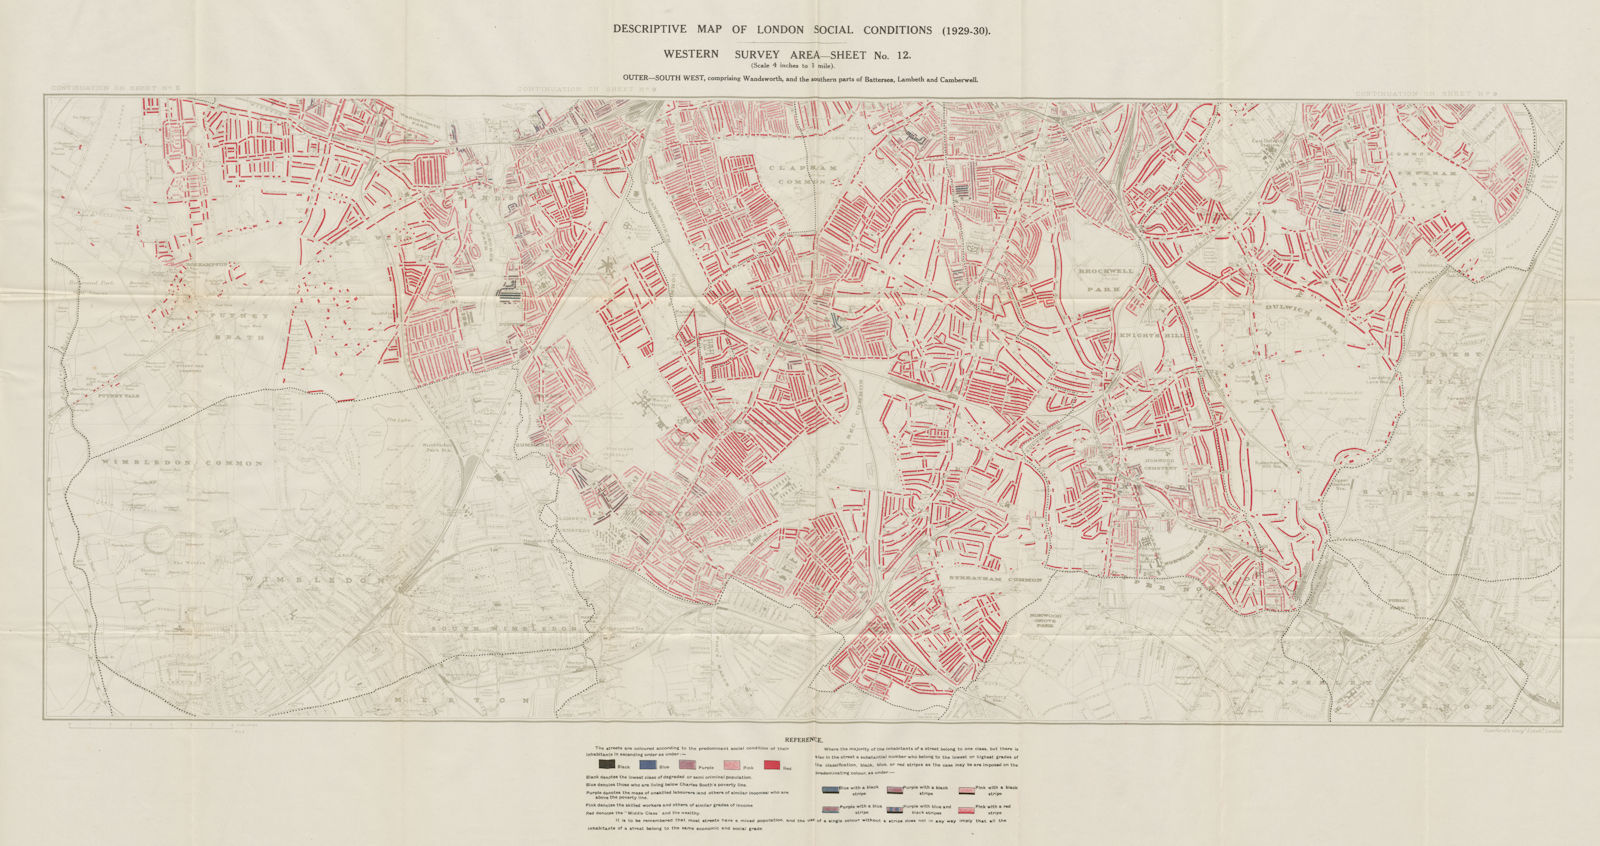 BOOTH /LSE POVERTY MAP Wandsworth Battersea Lambeth Clapham Dulwich Norwood 1930